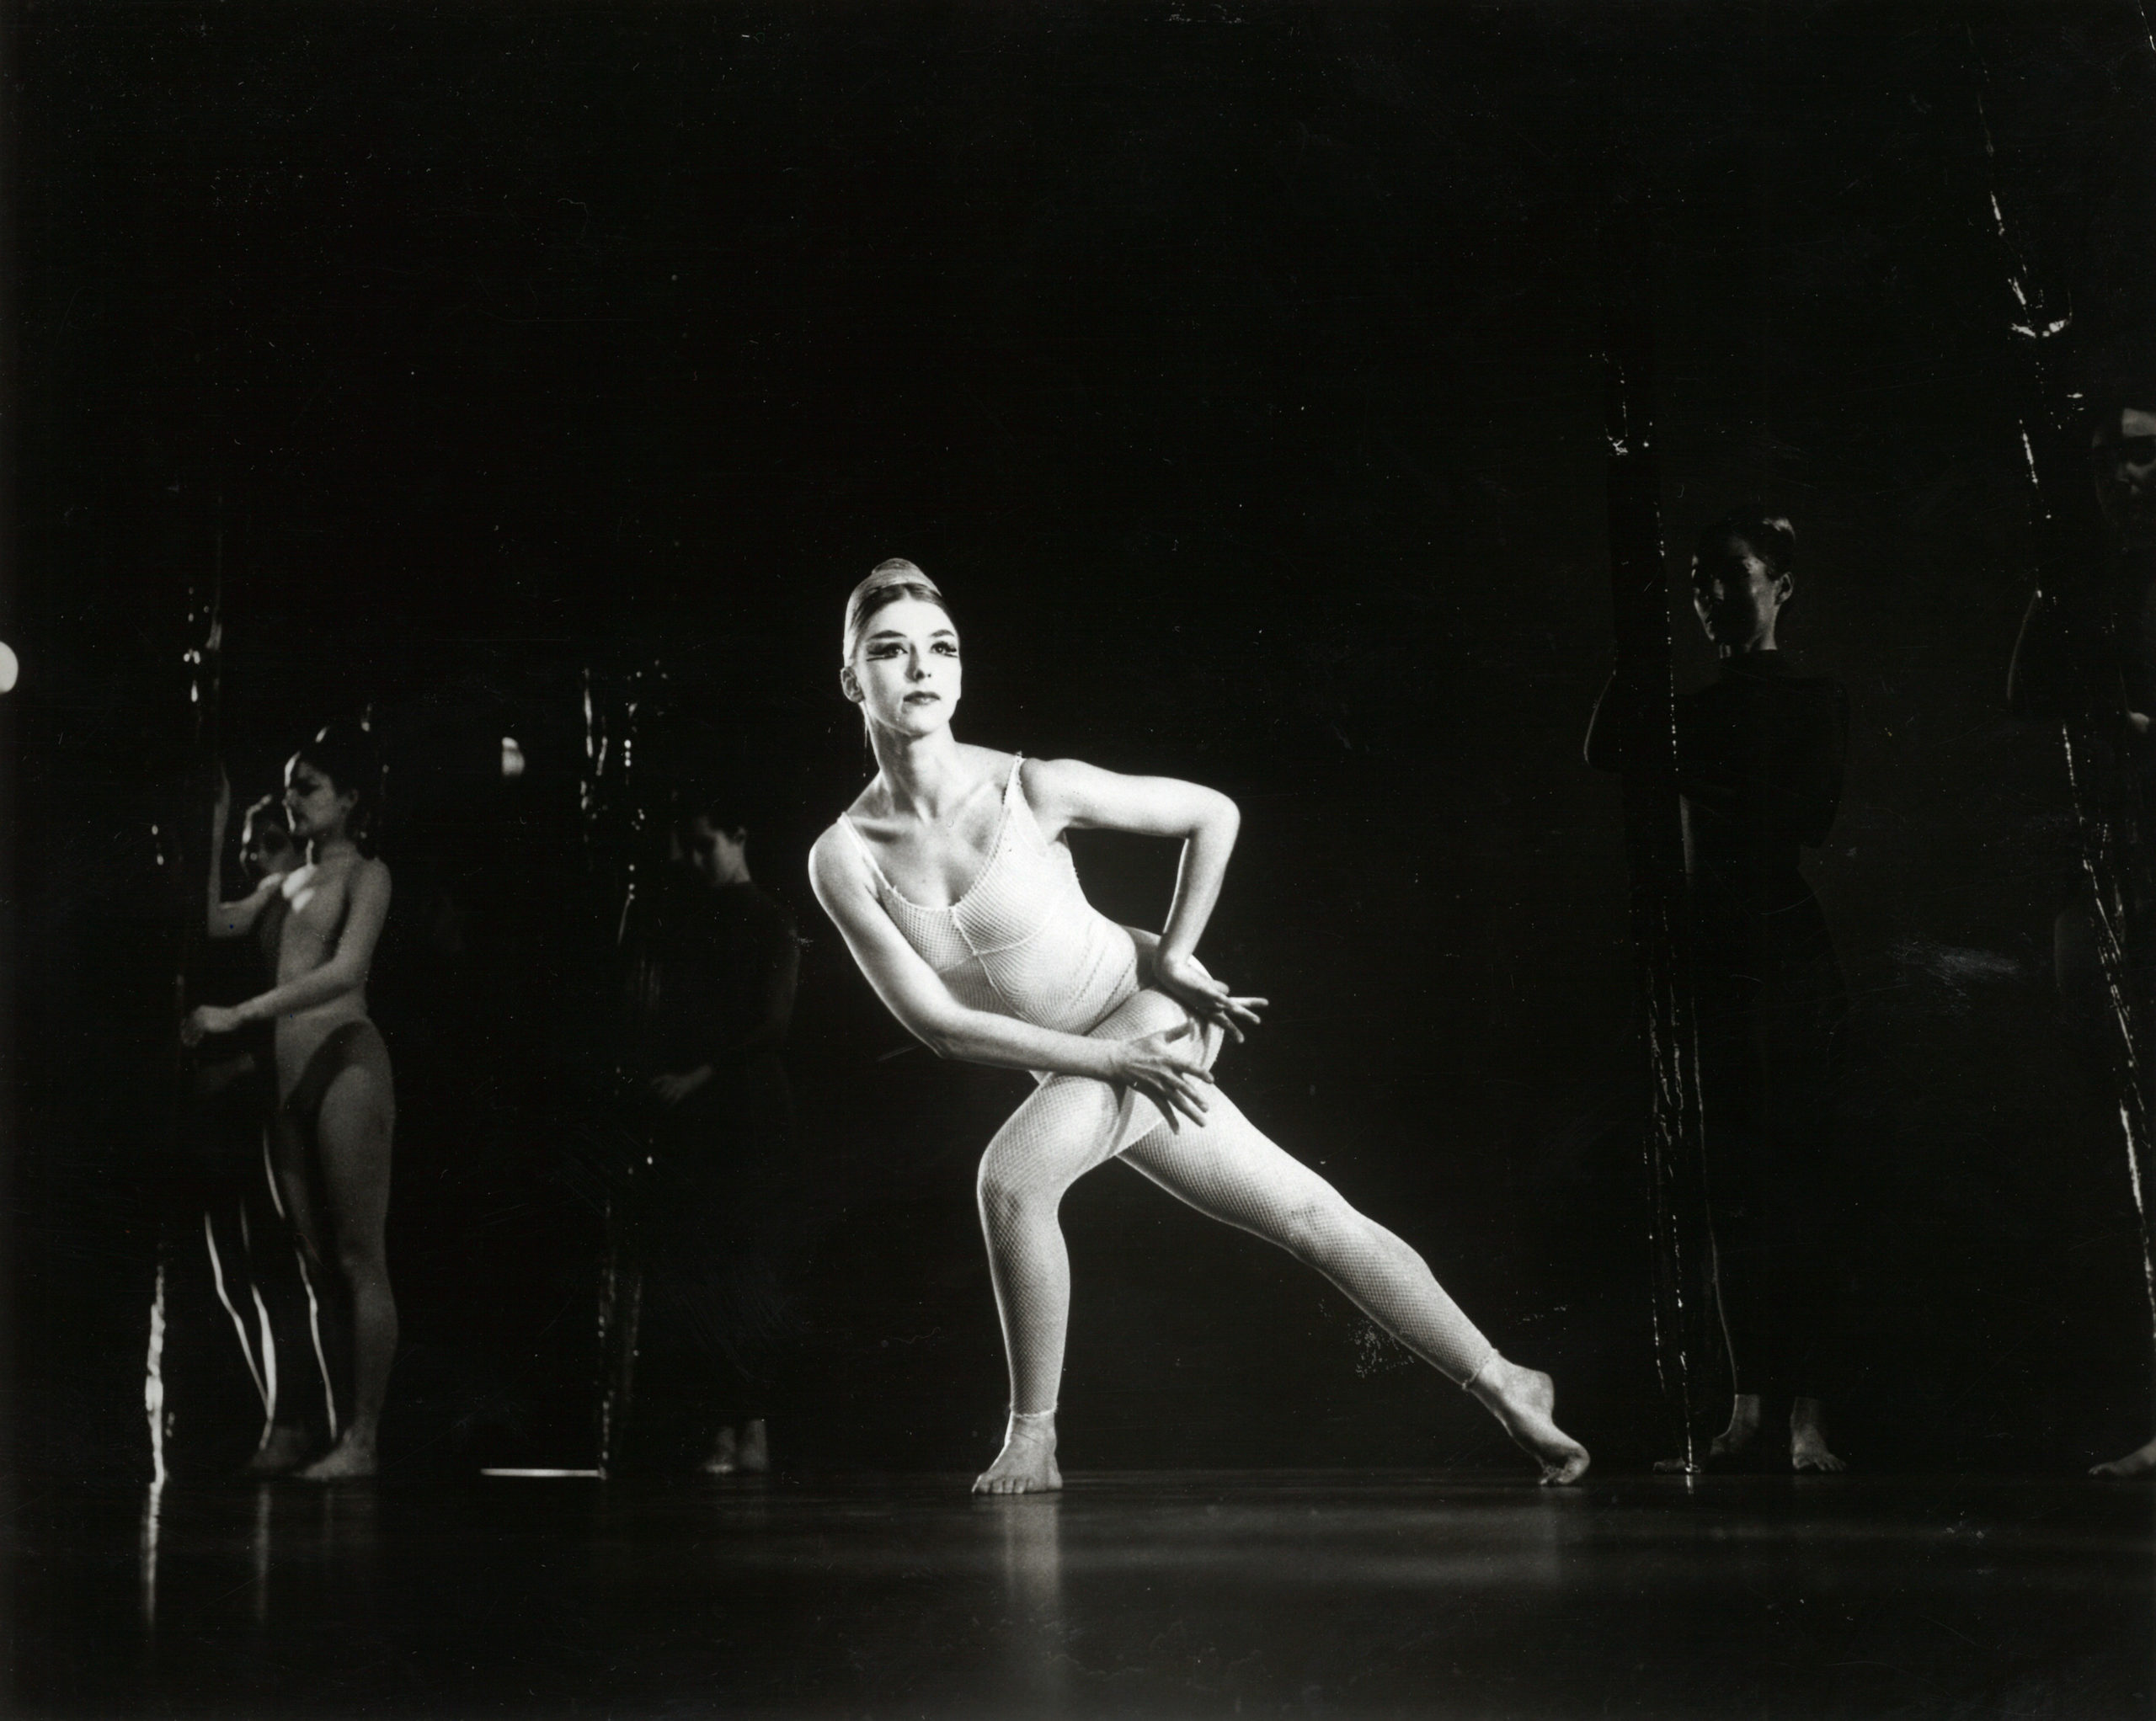 In a black and white archival image, Phyllis Lamhut is onstage in a pale unitard. She lunges forward, twisting so her torso forms a diagonal with her back leg and she can peer over her front shoulder. Her hands form a box at her downstage hip. Her blonde hair is neatly pulled back from her face.